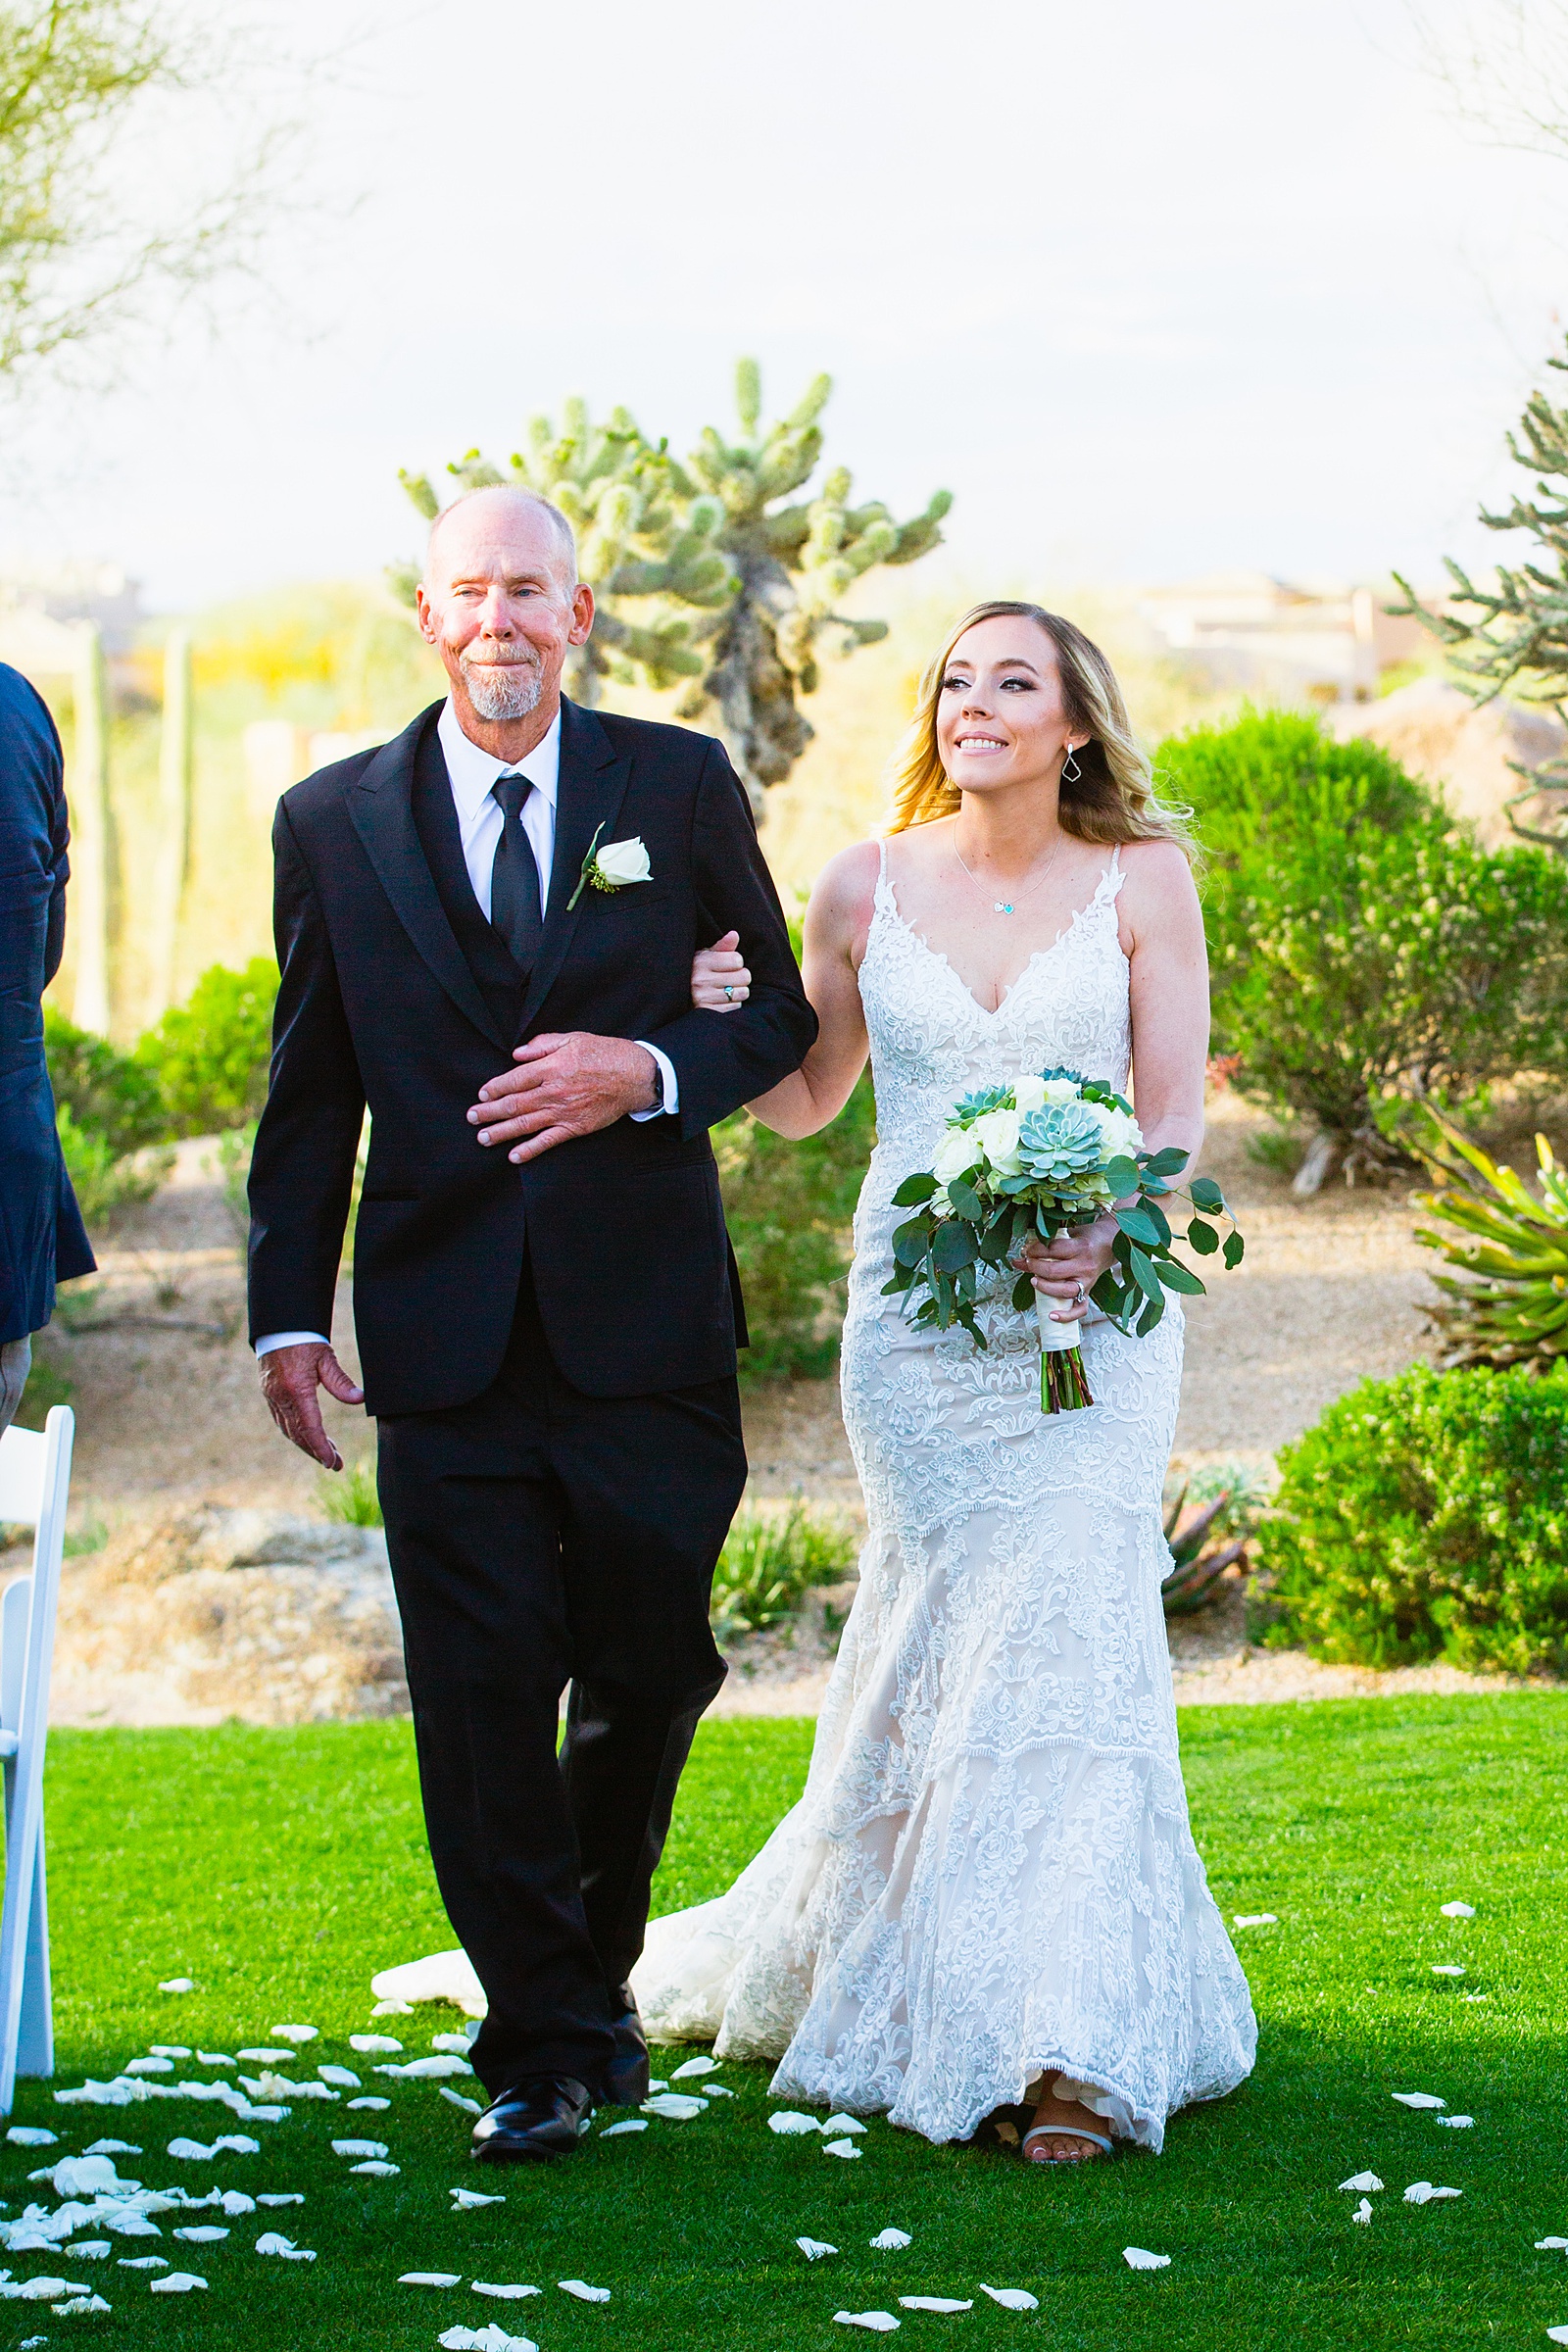 Bride walking down aisle during Troon North wedding ceremony by Phoenix wedding photographer PMA Photography.